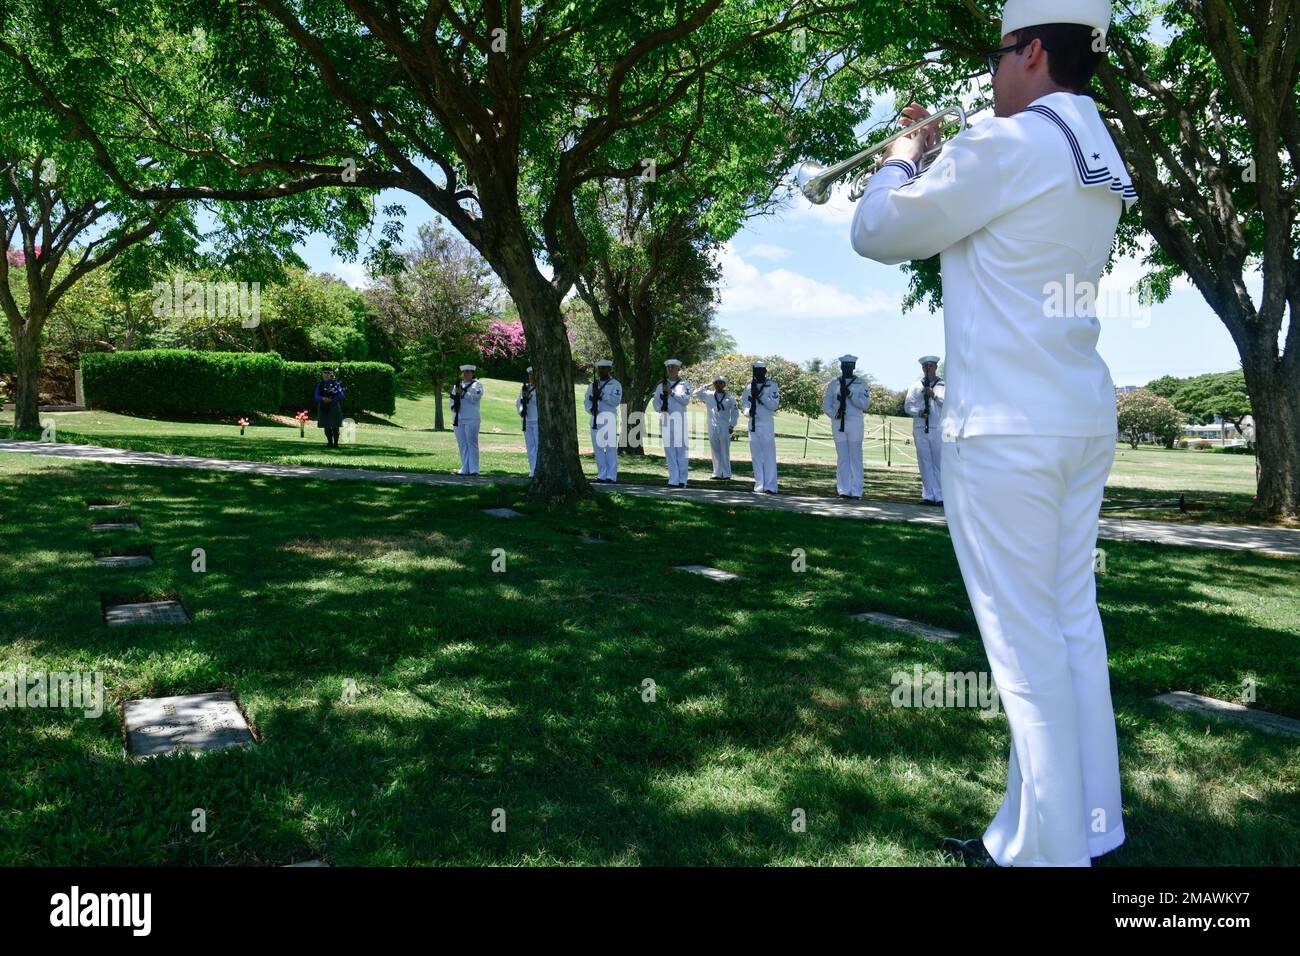 Sailors assigned to Navy Region Hawaii and the Defense POW/MIA Accounting Agency (DPAA) conduct an internment ceremony for U.S. Navy Fire Controlman 2nd Class George Gilbert, 20, of Indianapolis, at the National Memorial Cemetery of the Pacific, Honolulu, HI, June 6, 2022. Gilbert was assigned to the USS Oklahoma, which sustained fire from Japanese aircraft and multiple torpedo hits causing the ship to capsize and resulted in the deaths of more than 400 crew members on Dec. 7, 1941, at Ford Island, Pearl Harbor. Gilbert was recently identified through DNA analysis by the DPAA forensic laborato Stock Photo